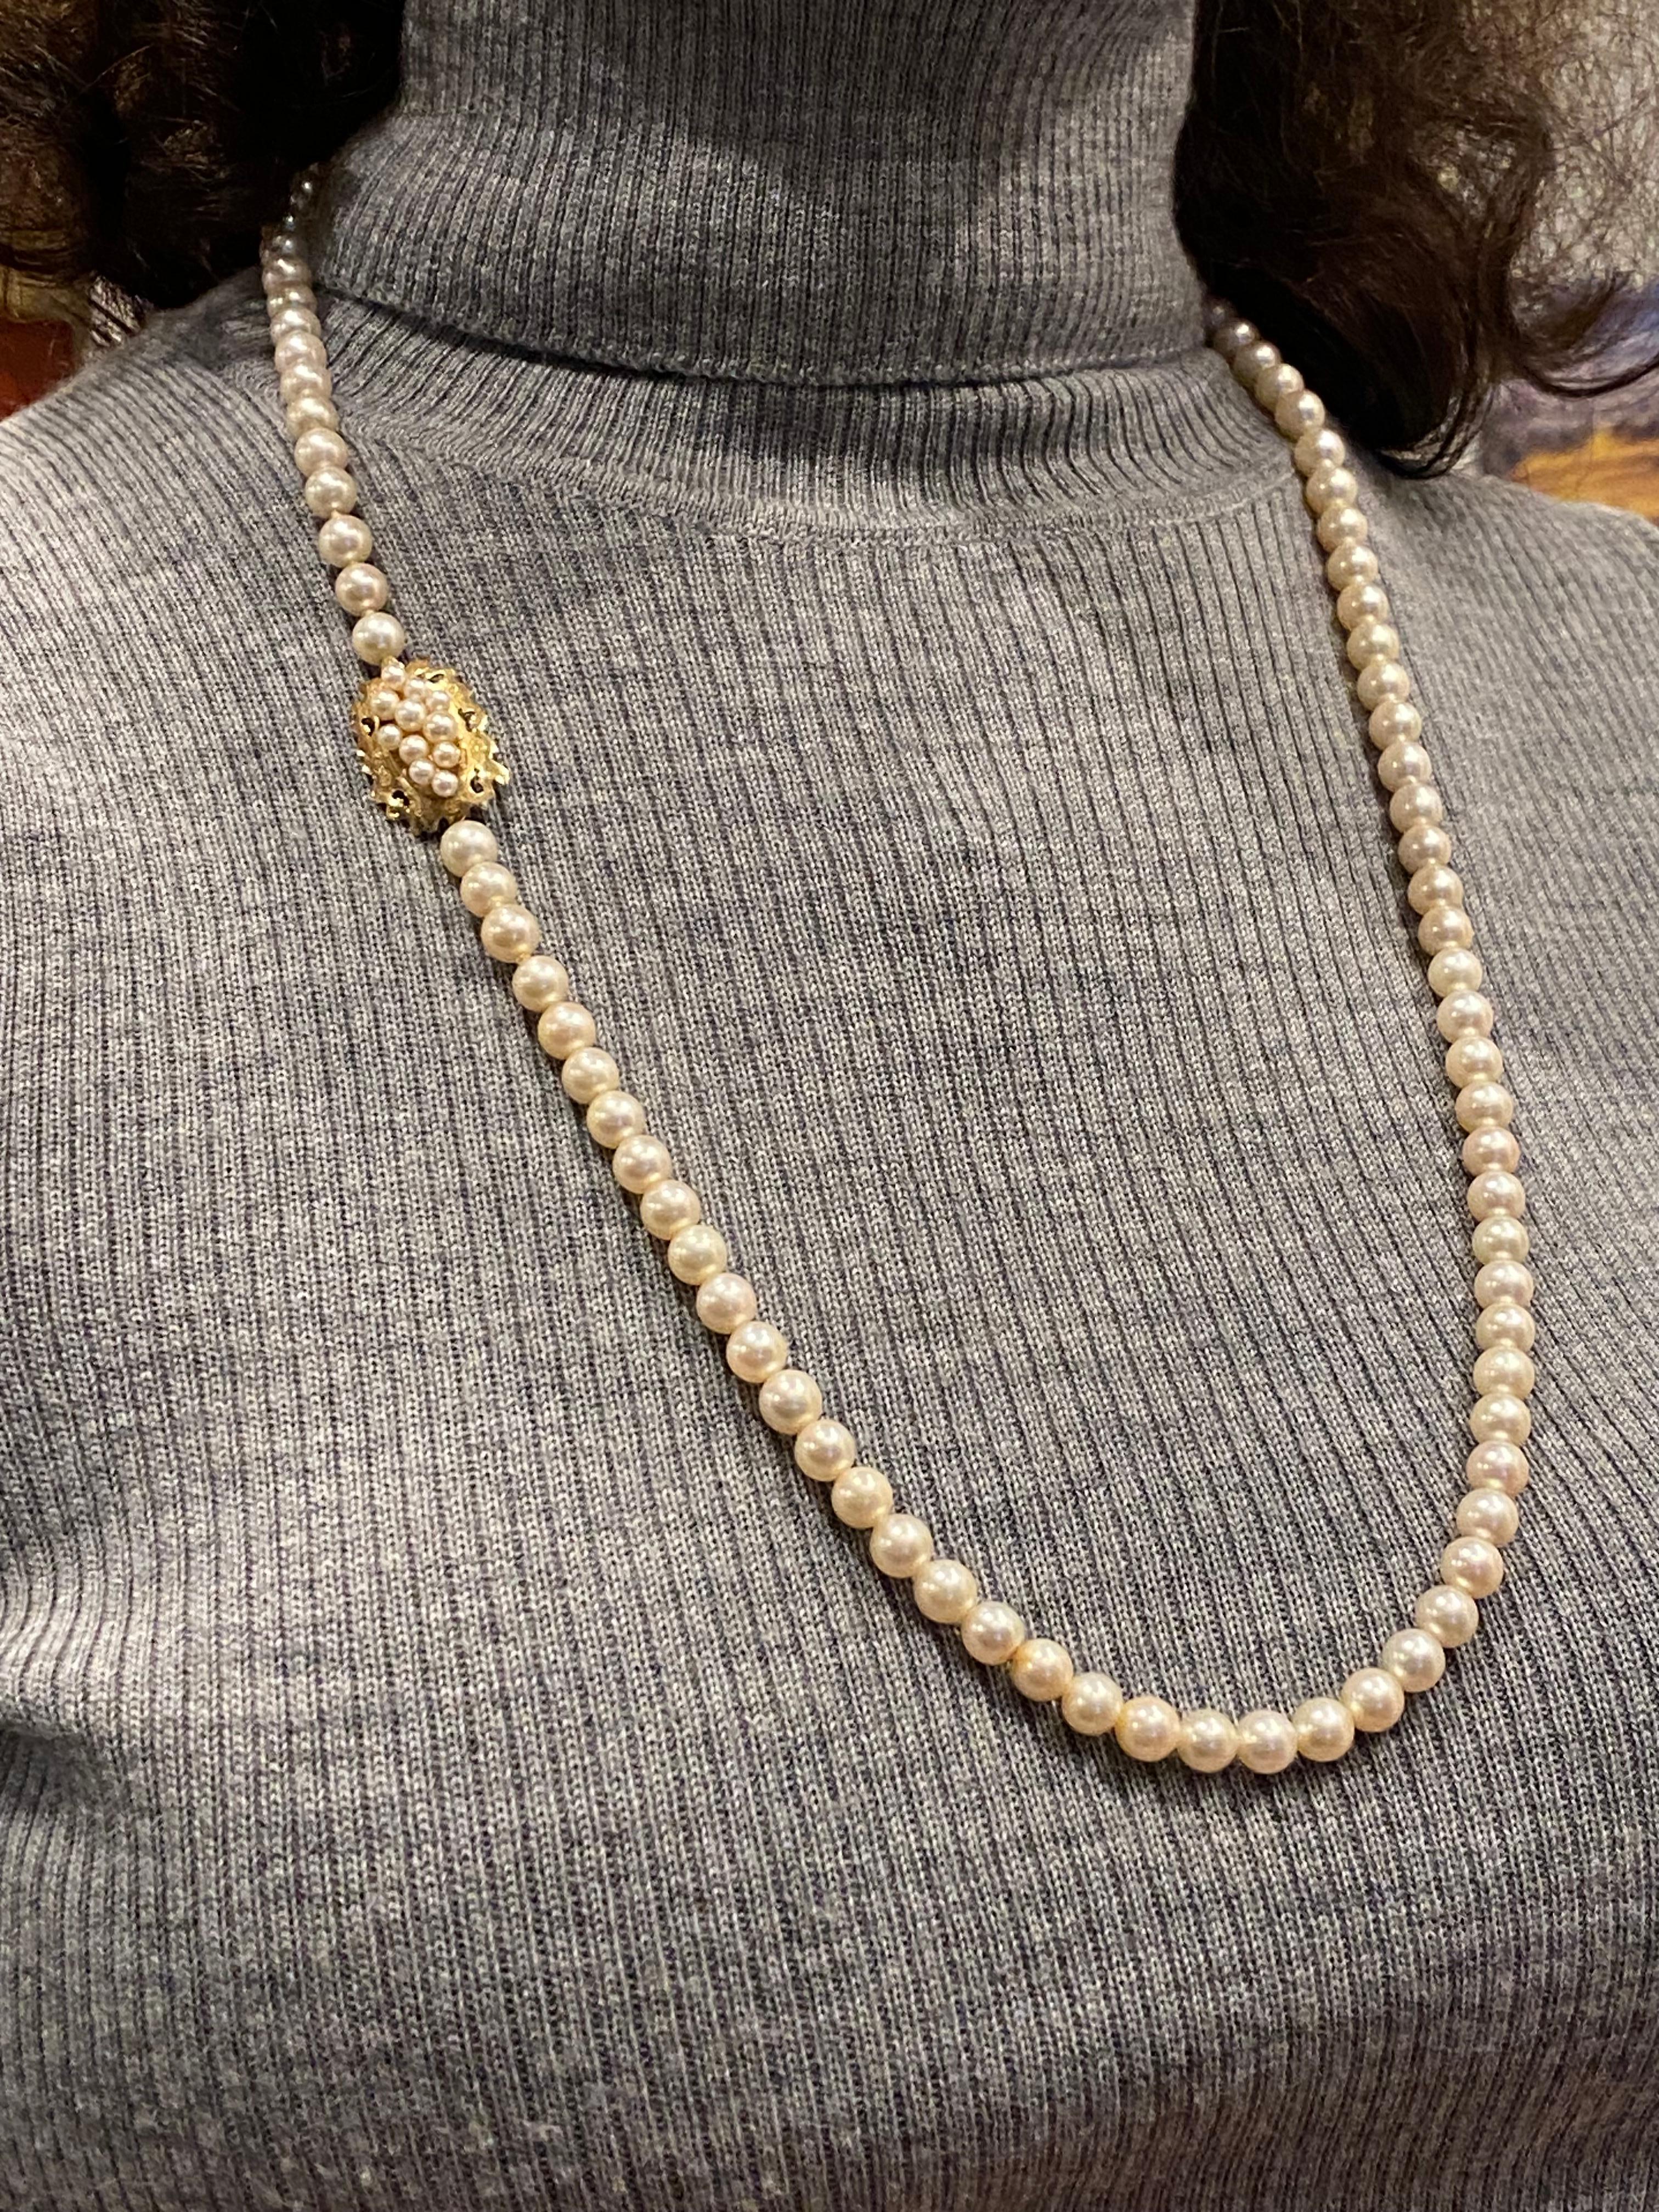 South Sea Pearl Opera Length 78cm (30.7 inches) Necklace 18K Gold & Pearl Clasp For Sale 3